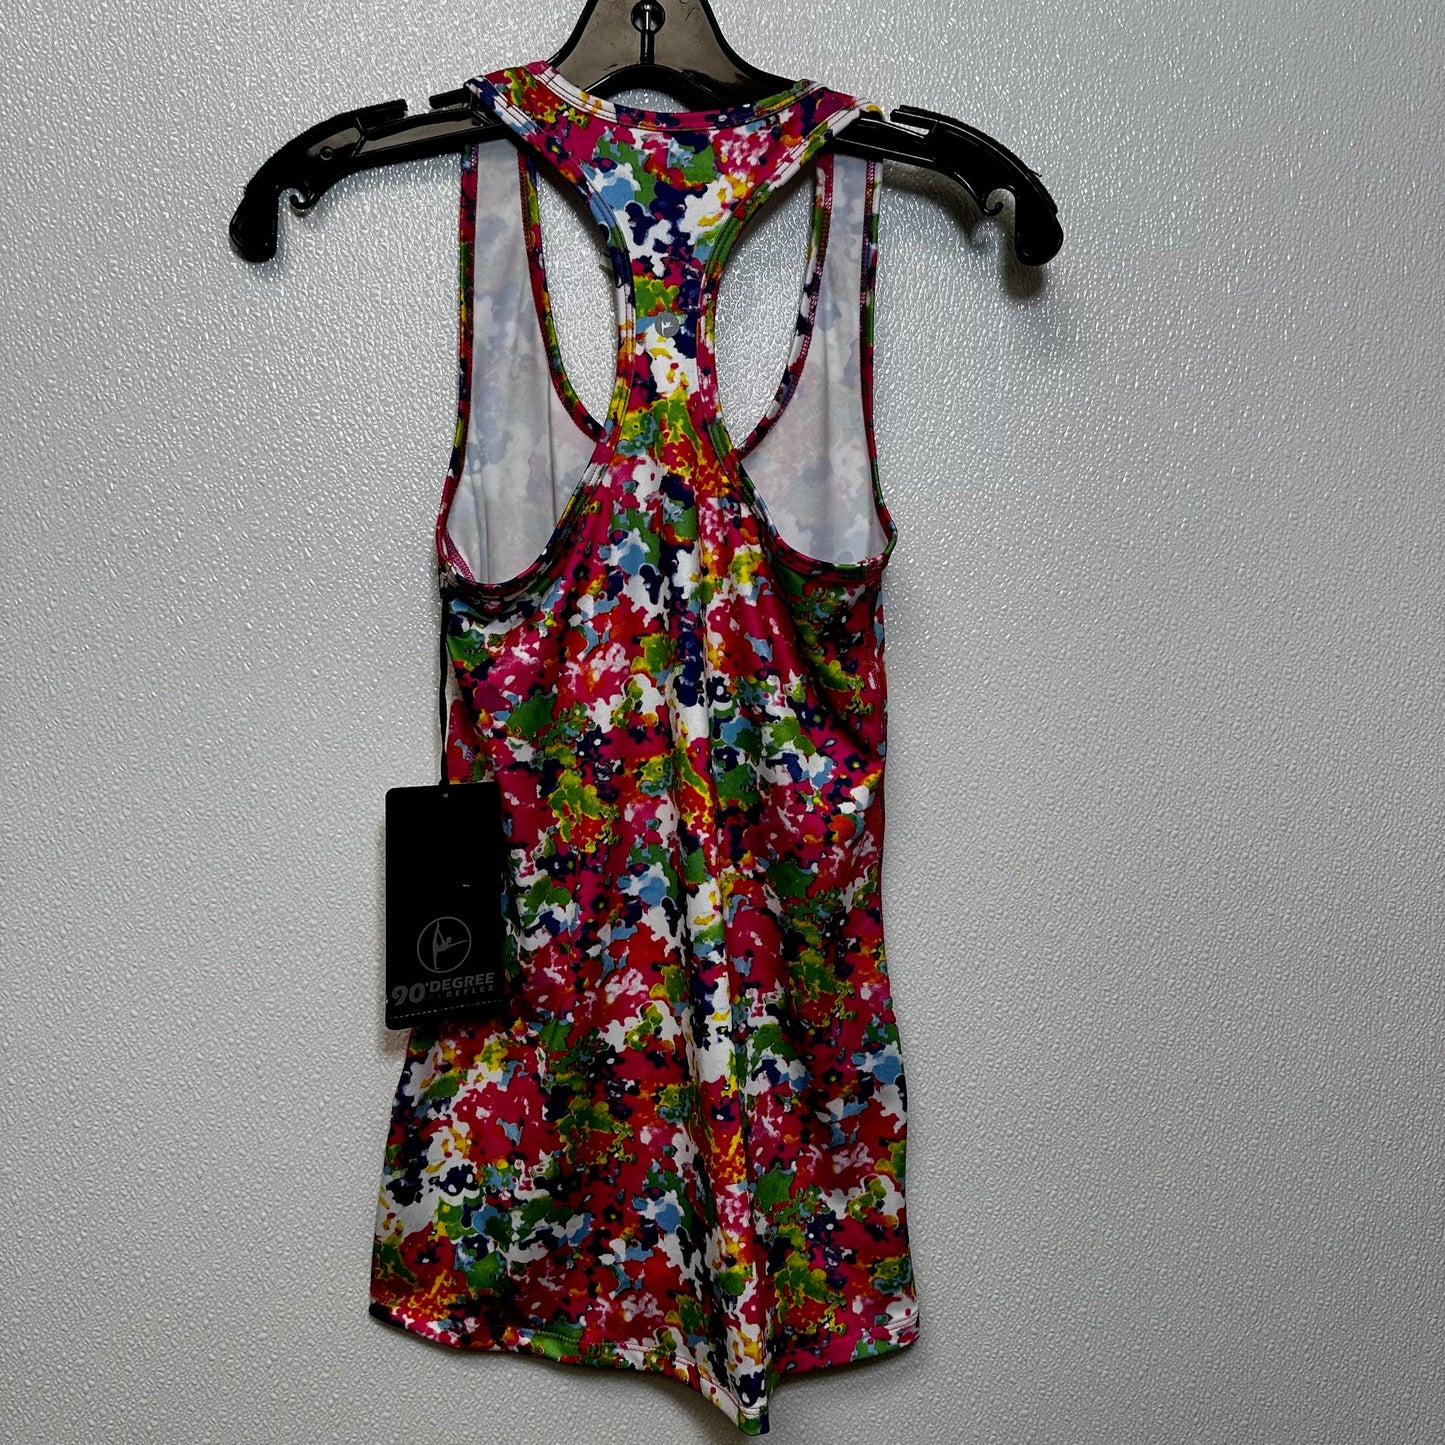 Floral Athletic Tank Top 90 Degrees By Reflex, Size S